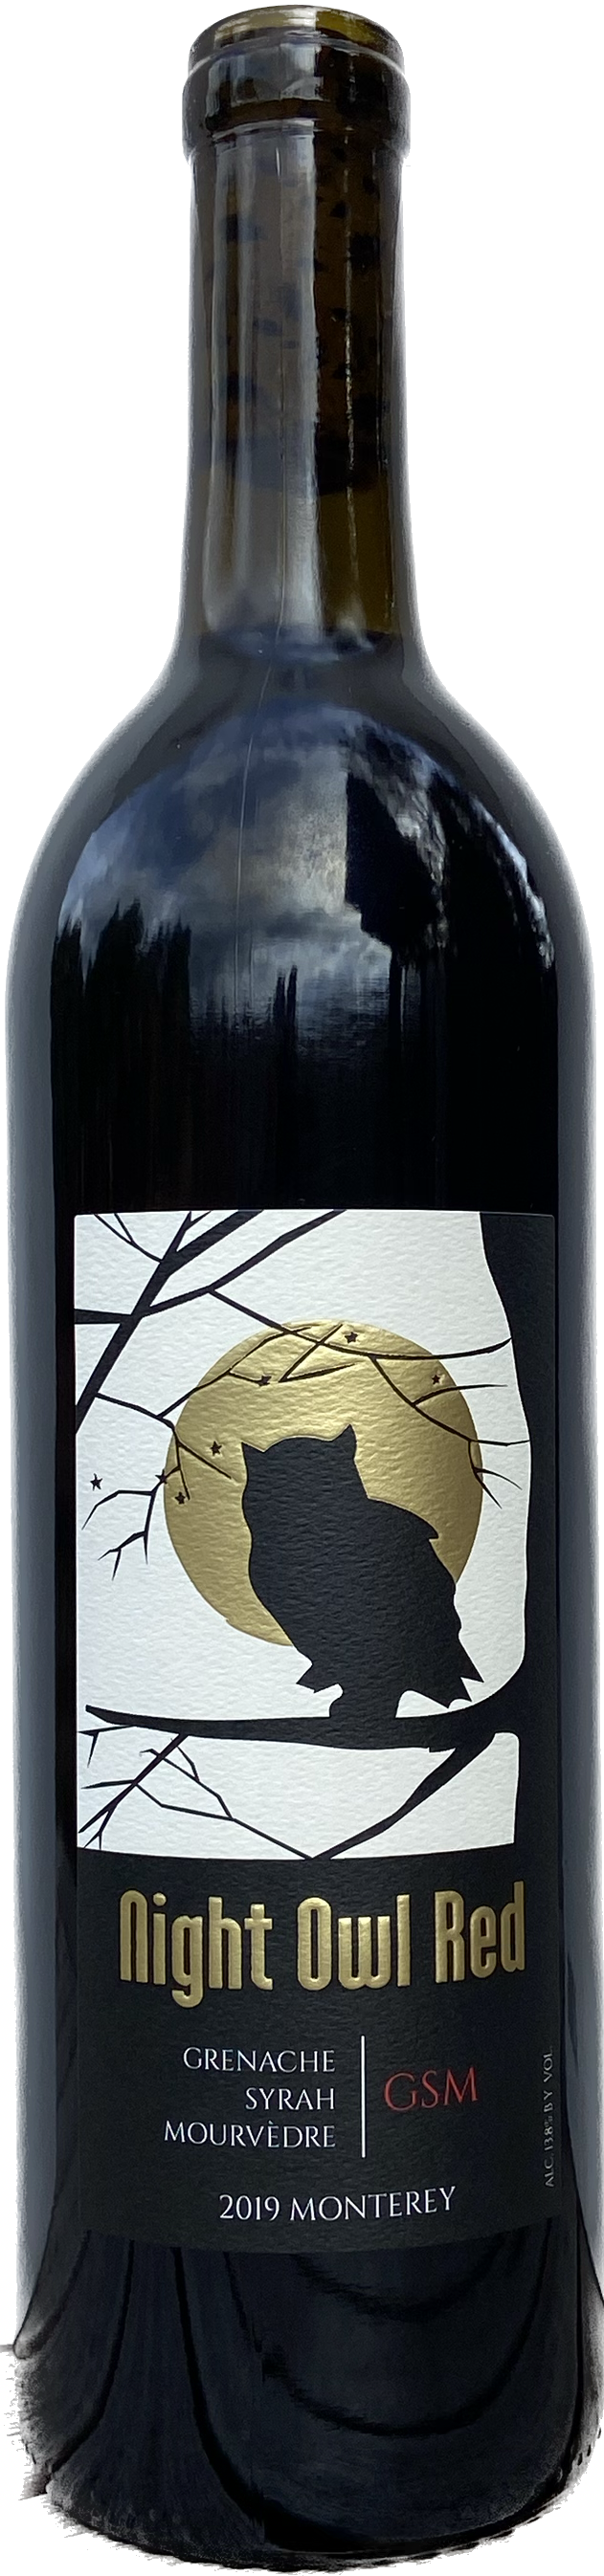 Product Image for 2019 Night Owl Red, Rhone Blend